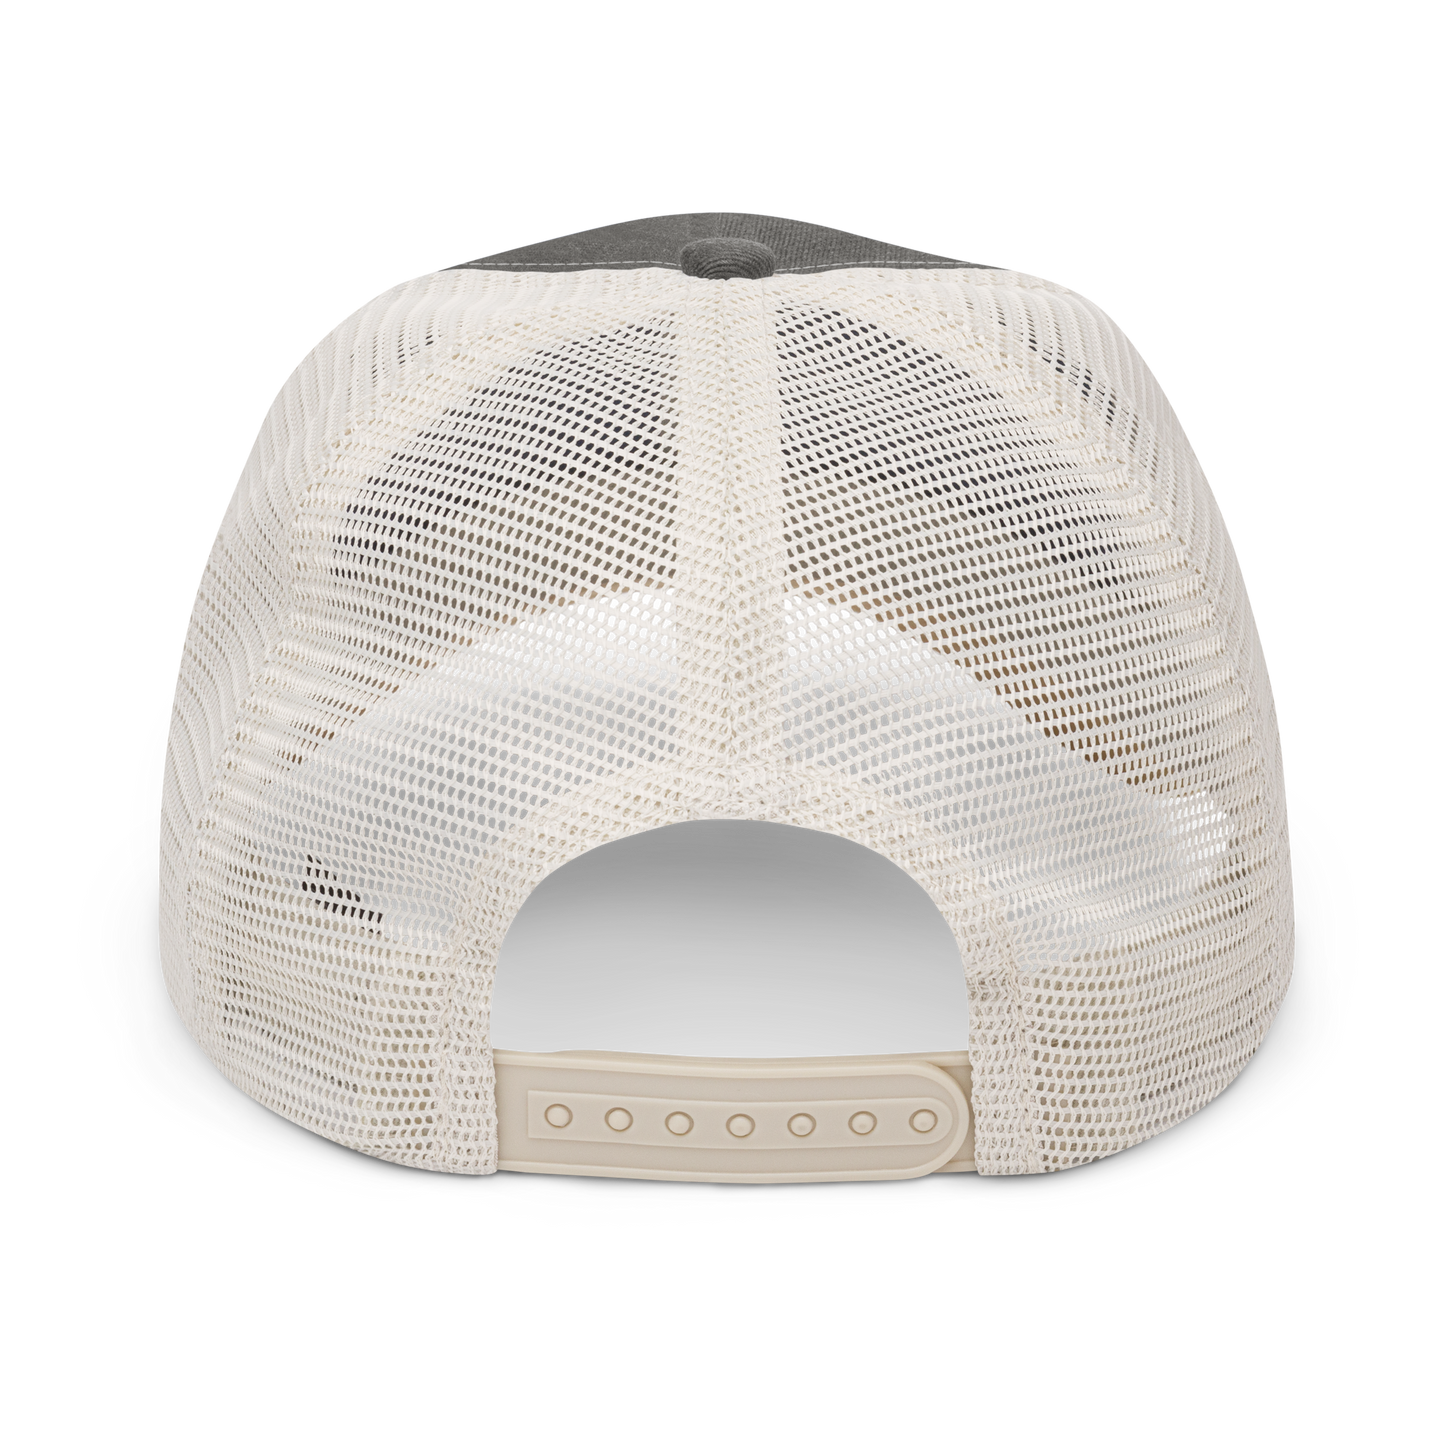 YHM Designs - YQG Windsor Pigment-Dyed Trucker Cap - Crossed-X Design with Airport Code and Vintage Propliner - White Embroidery - Image 11